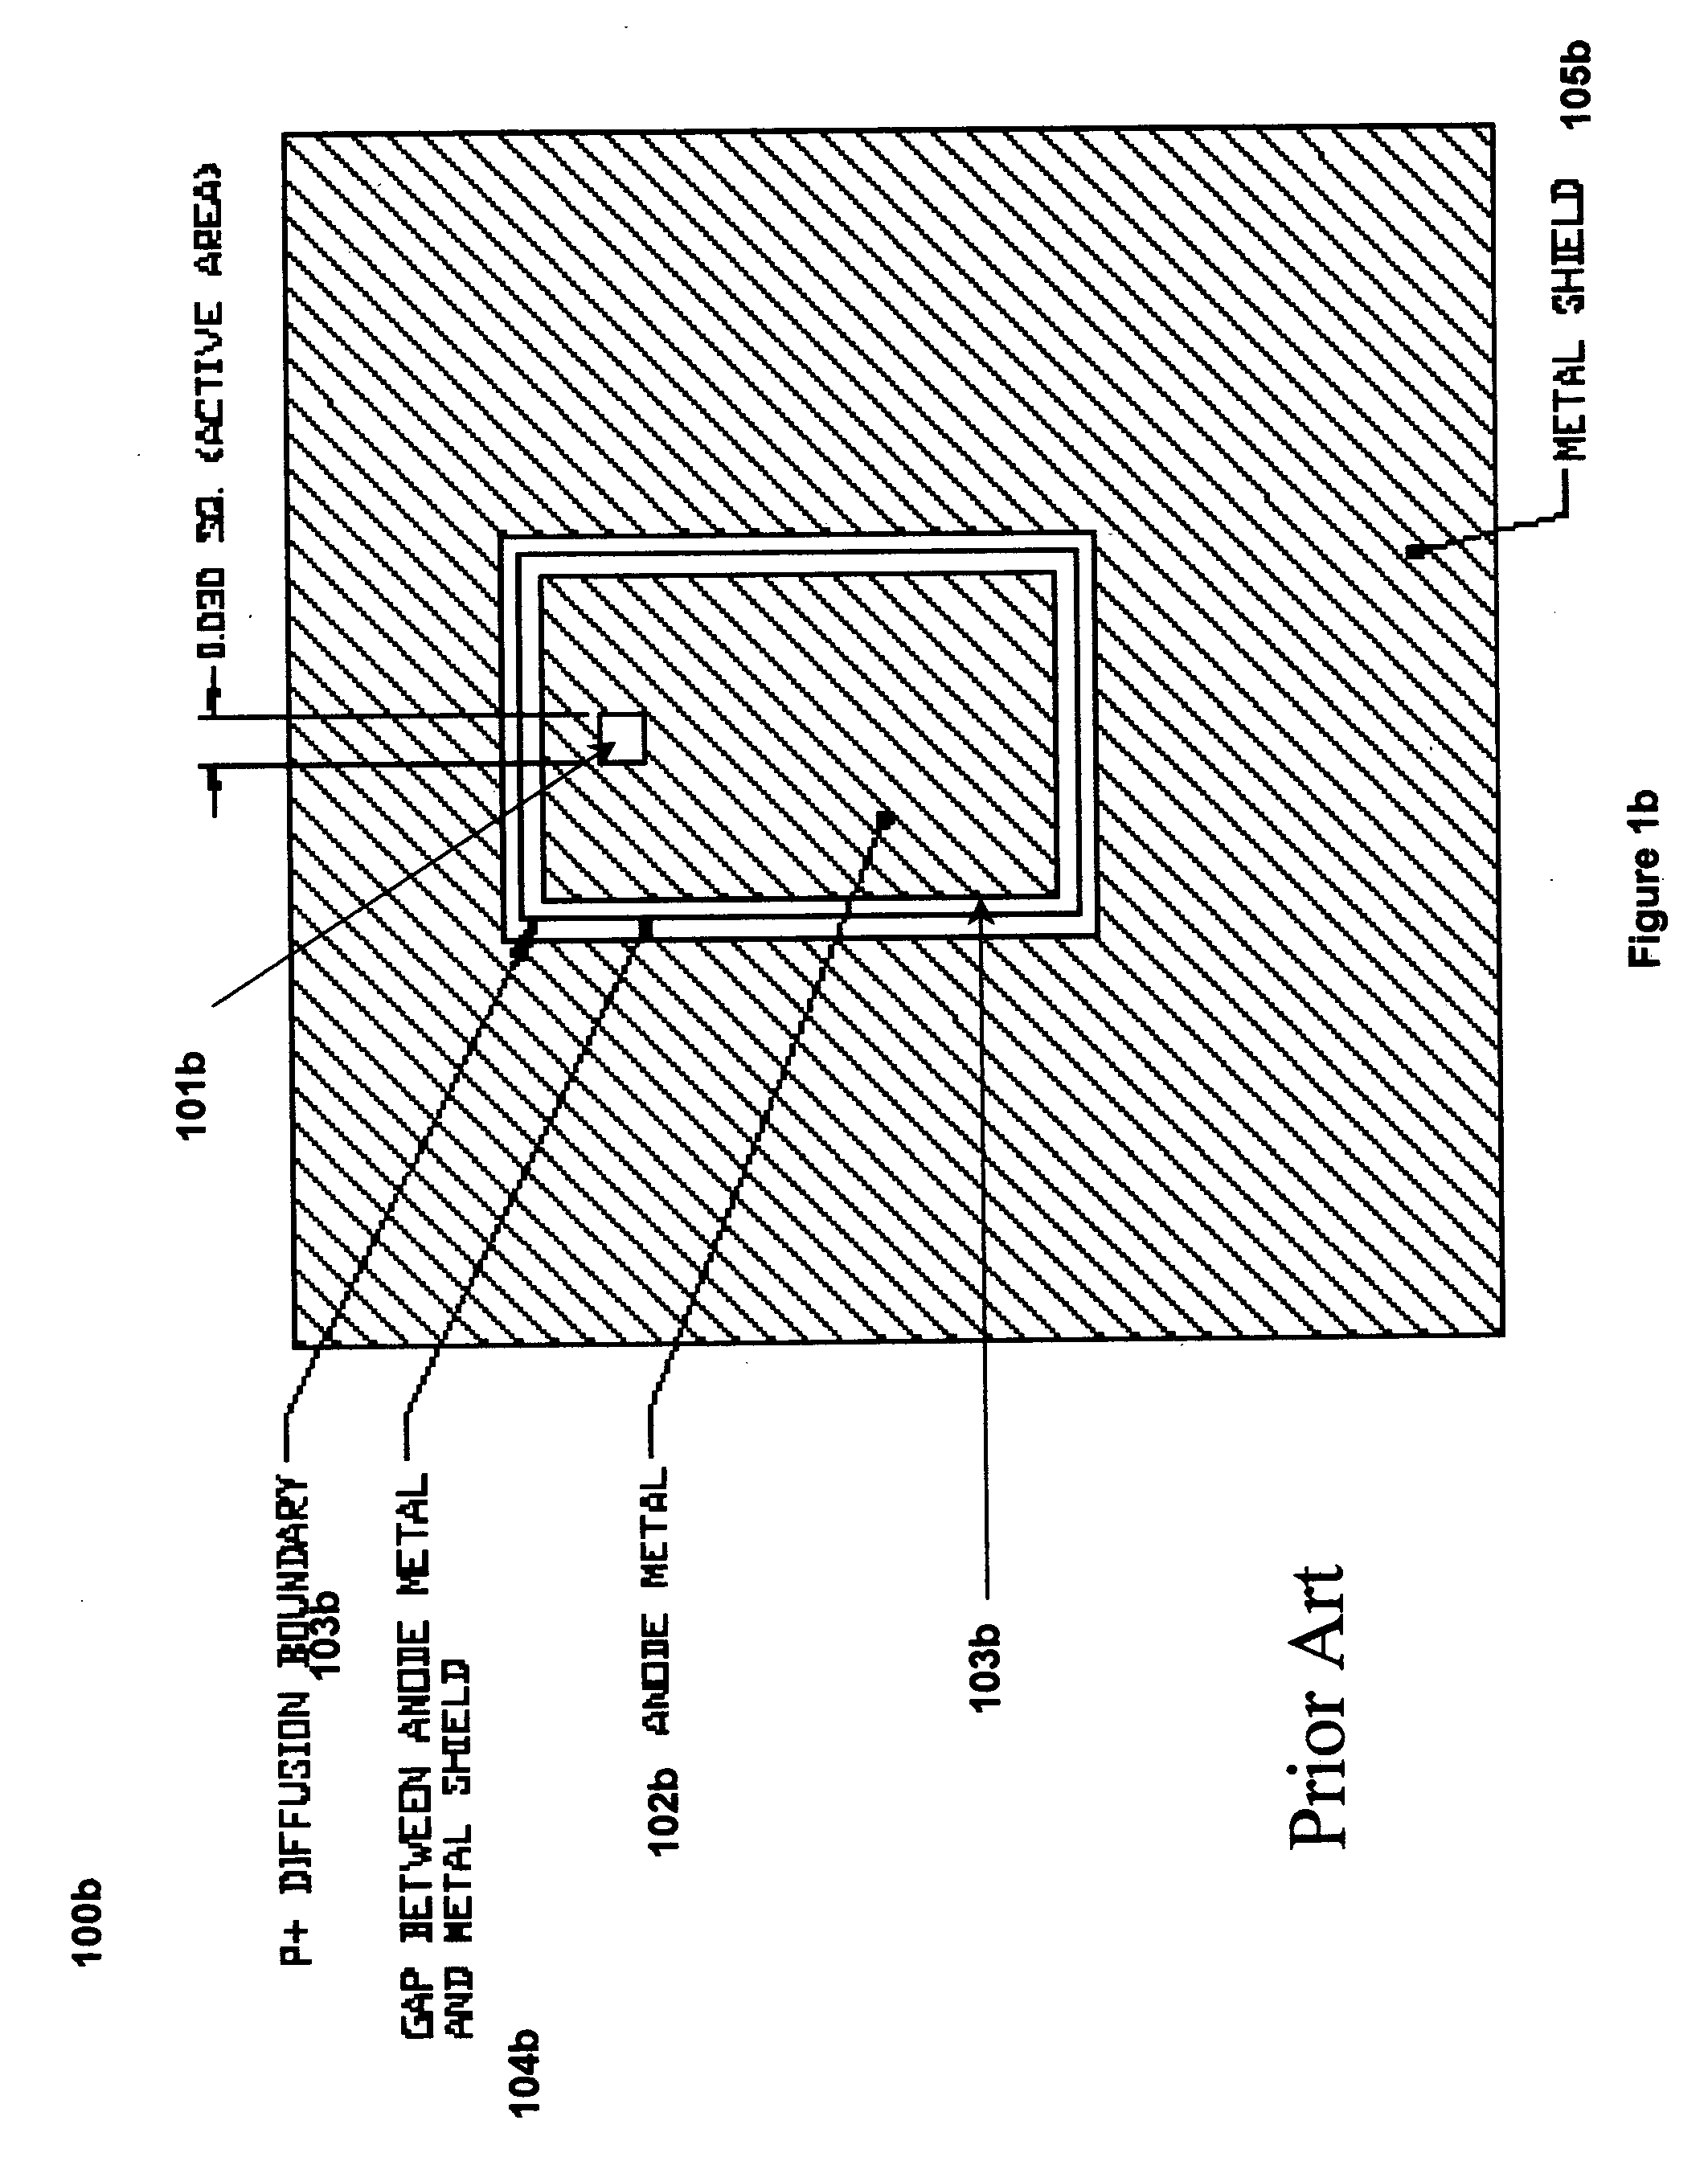 Photodiode with controlled current leakage